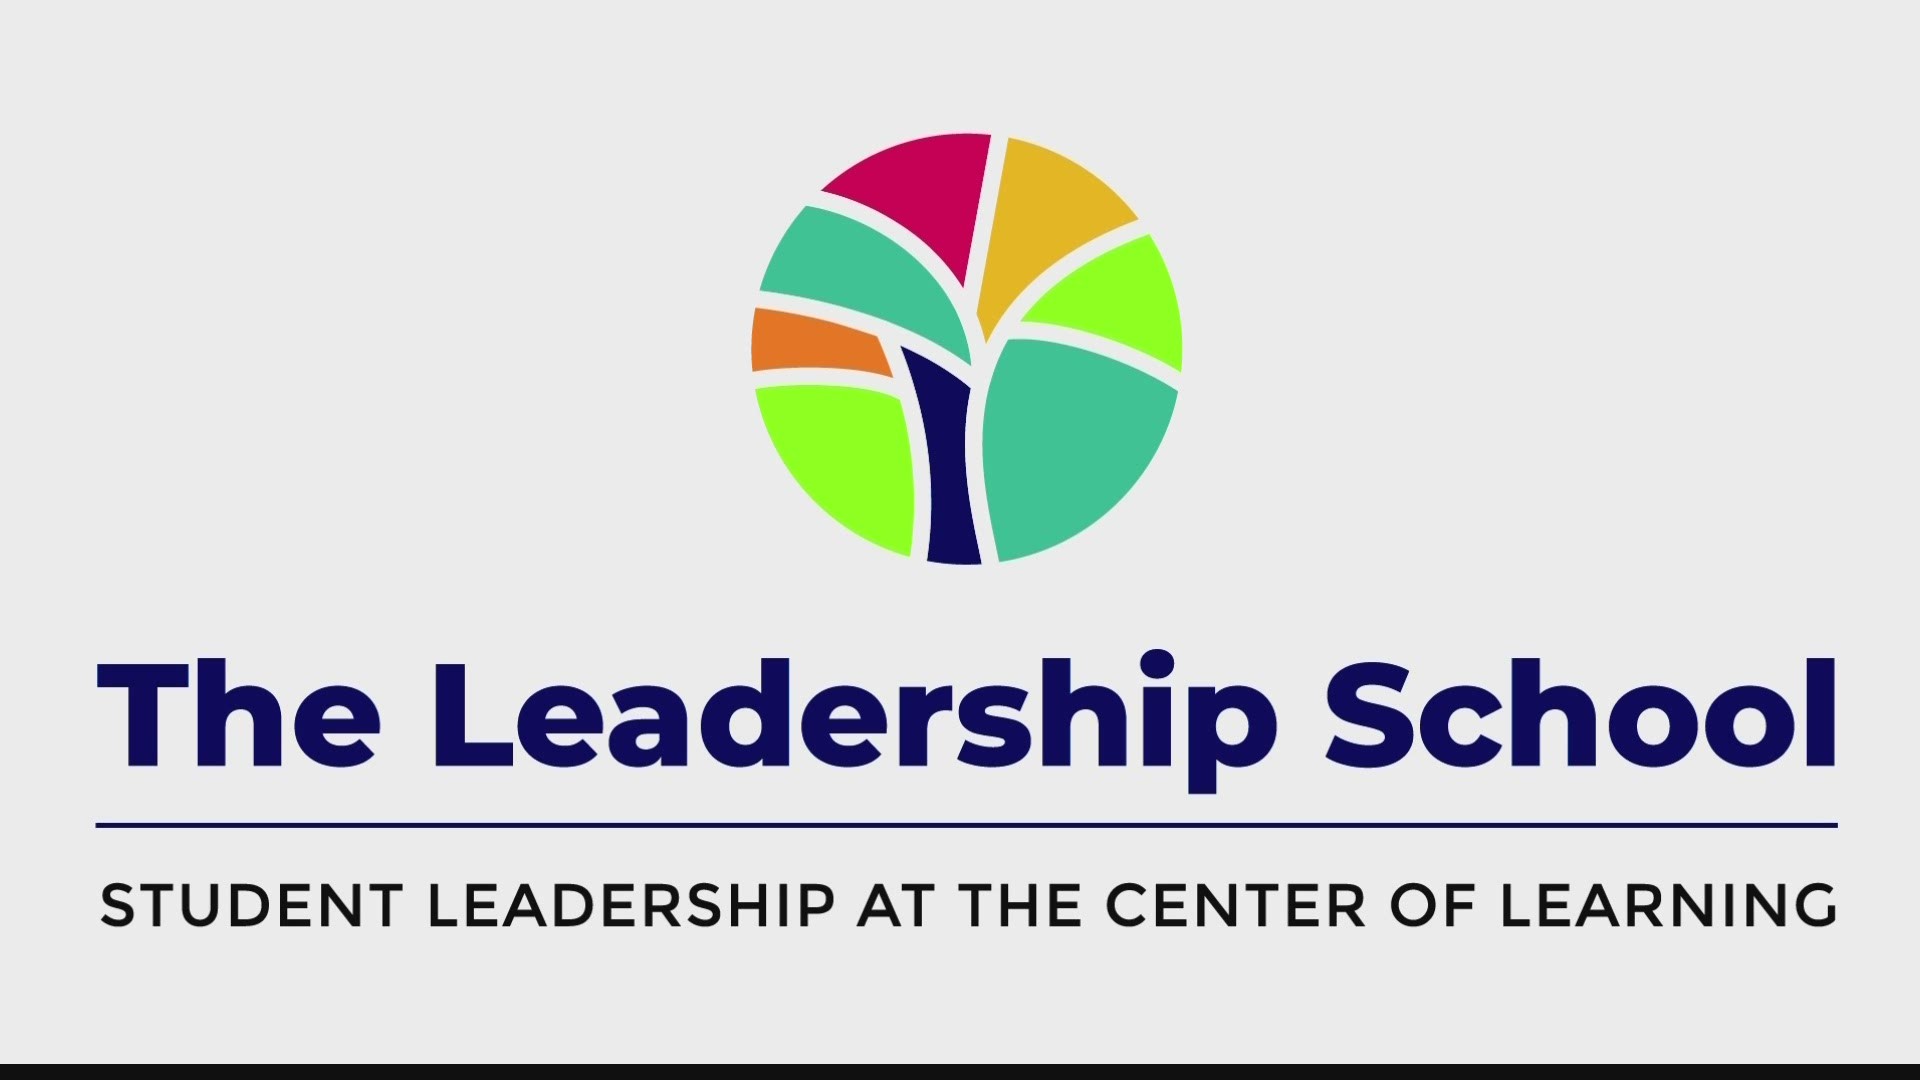 The Leadership School creates personalized educational experiences for its students for free!